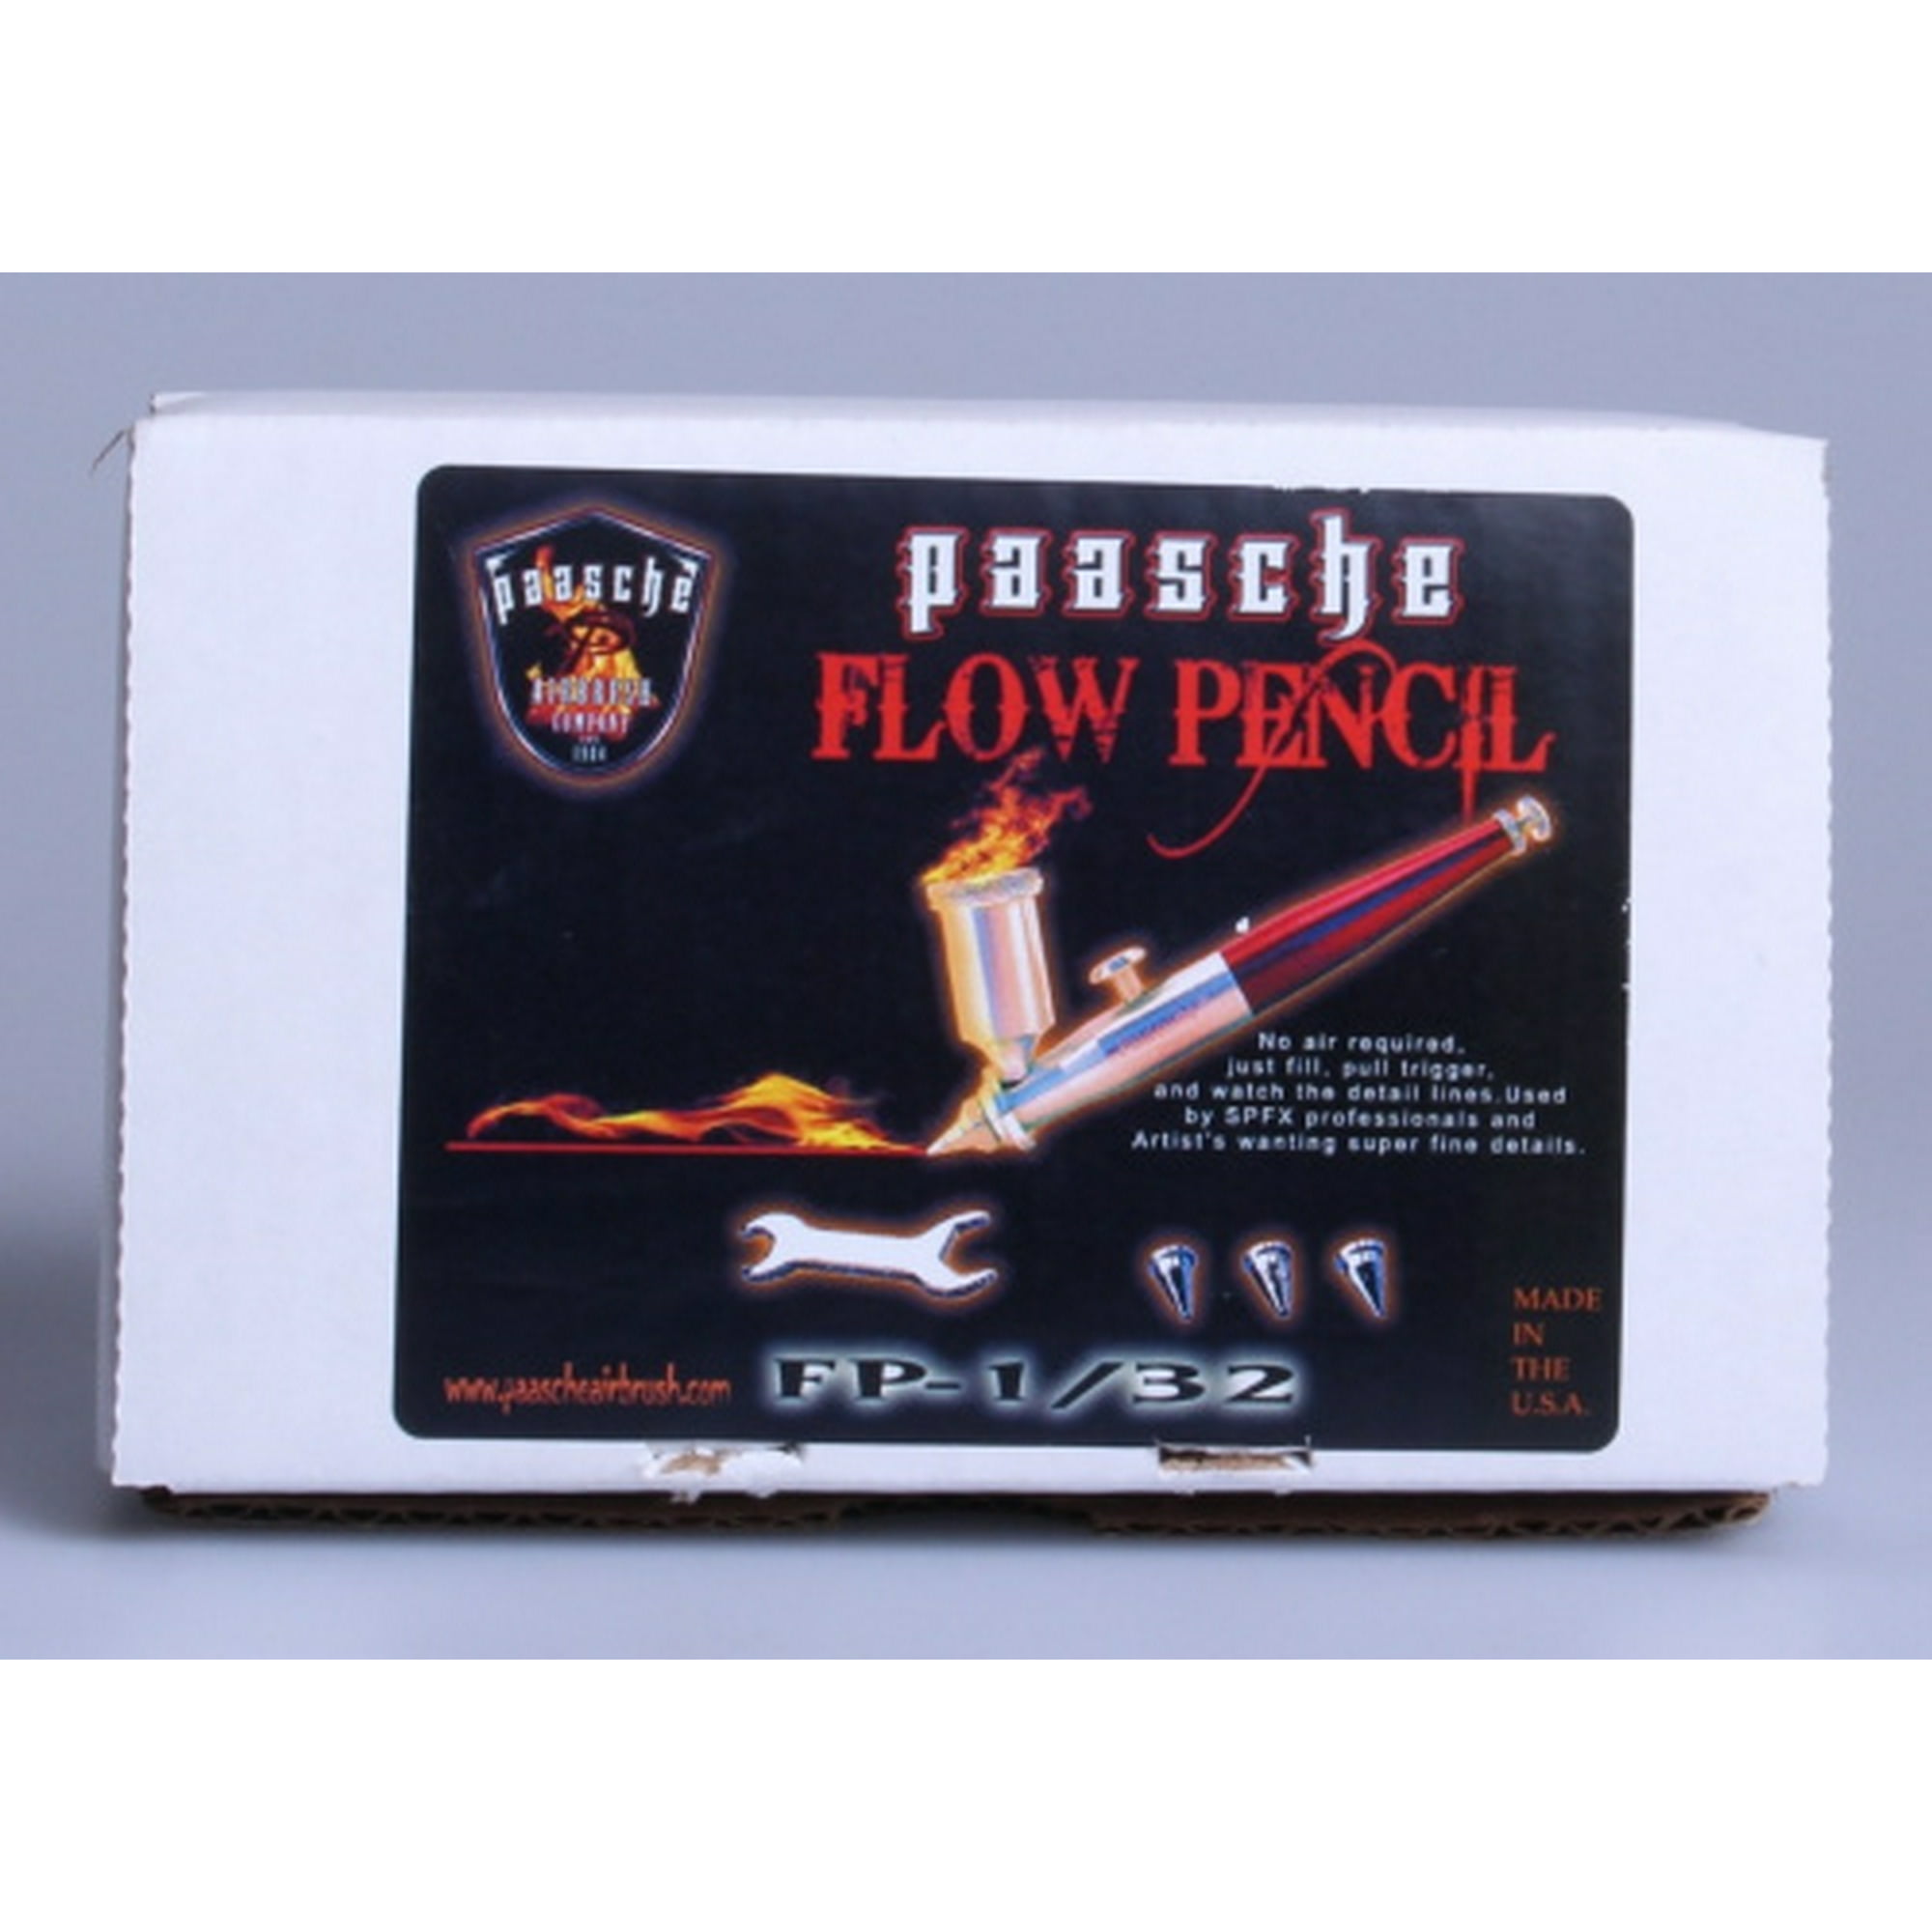 Paasche Airbrush Flow Pencil with Pressure Cup(Includes all Nibs Sizes)